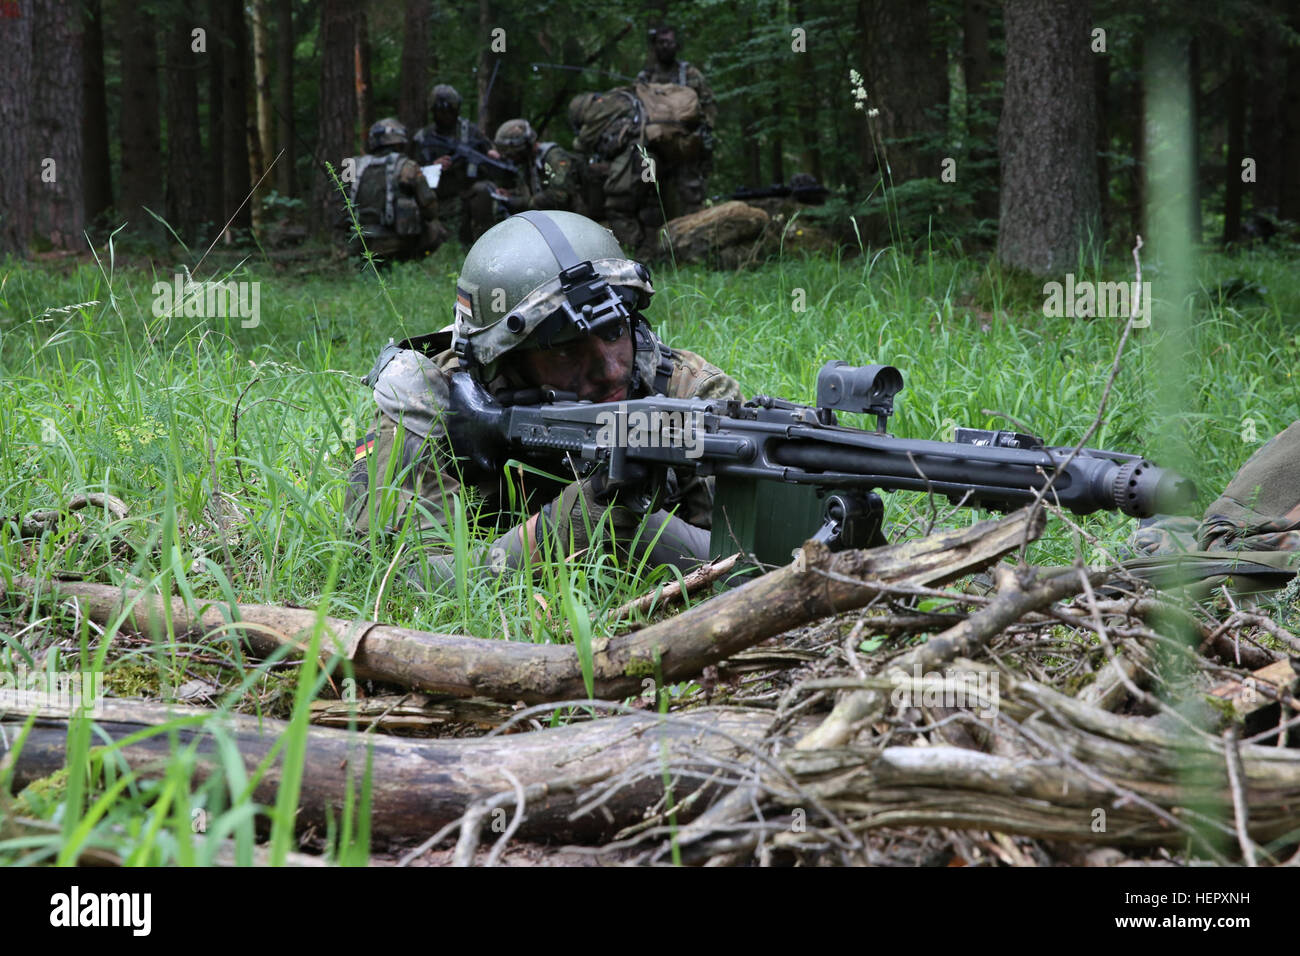 A German Bundeswehr soldier of 4th Paratrooper Company, 31st Paratrooper Regiment, provides security while conducting a dismounted patrol during Swift Response 16 training exercise at the Hohenfels Training Area, a part of the Joint Multinational Readiness Center, in Hohenfels, Germany, Jun. 21, 2016. Exercise Swift Response is one of the premier military crisis response training events for multi-national airborne forces in the world. The exercise is designed to enhance the readiness of the combat core of the U.S. Global Response Force – currently the 82nd Airborne Division’s 1st Brigade Comba Stock Photo